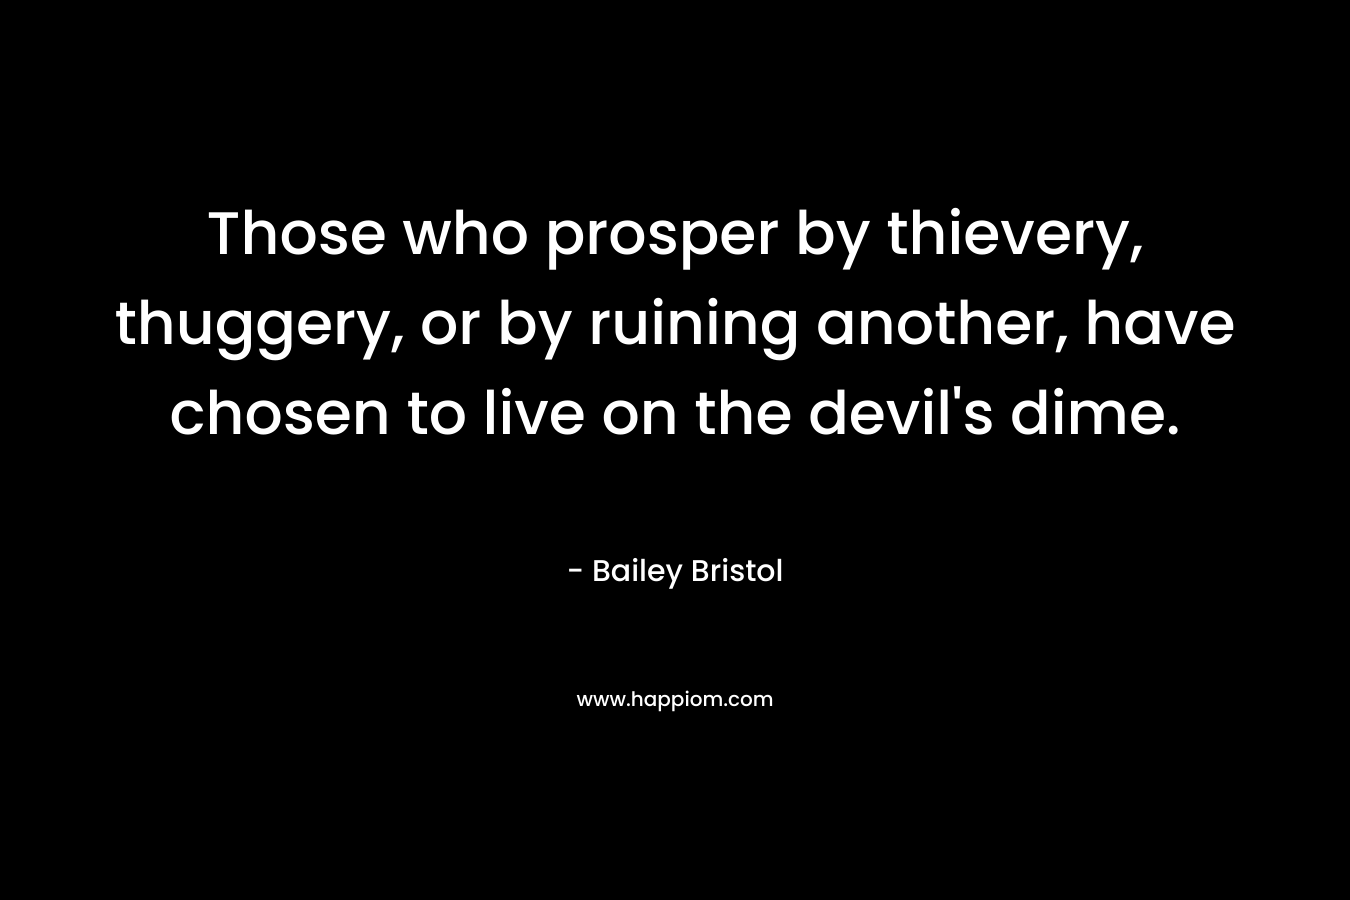 Those who prosper by thievery, thuggery, or by ruining another, have chosen to live on the devil’s dime. – Bailey Bristol